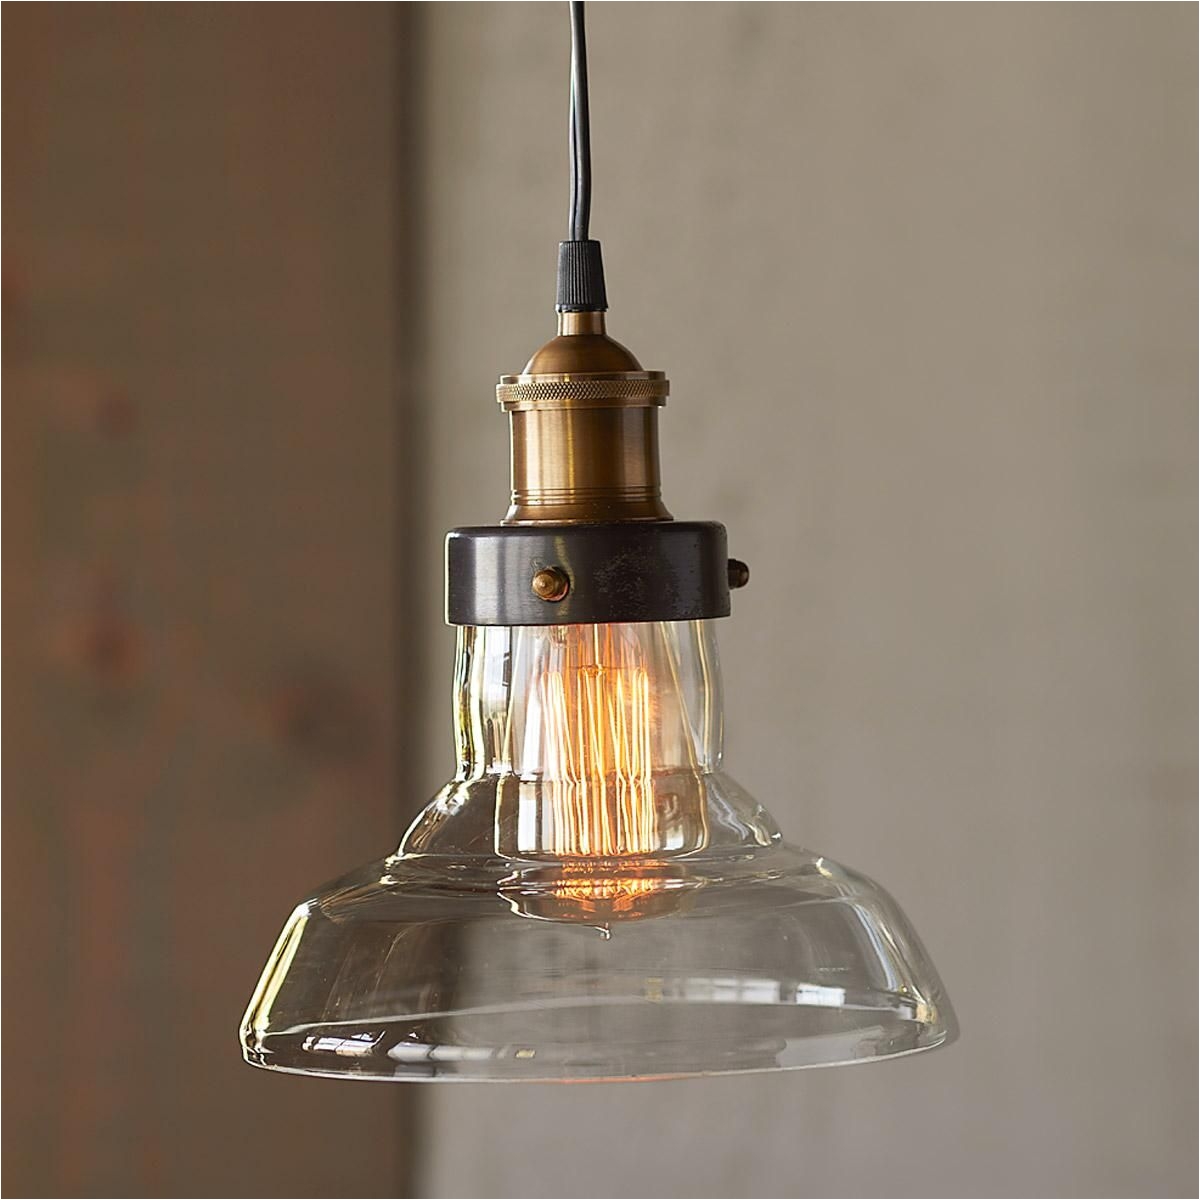 londonderry single pendant light londonderry single pendant thick clear glass to maximize light with bronzed aluminum and brass accents